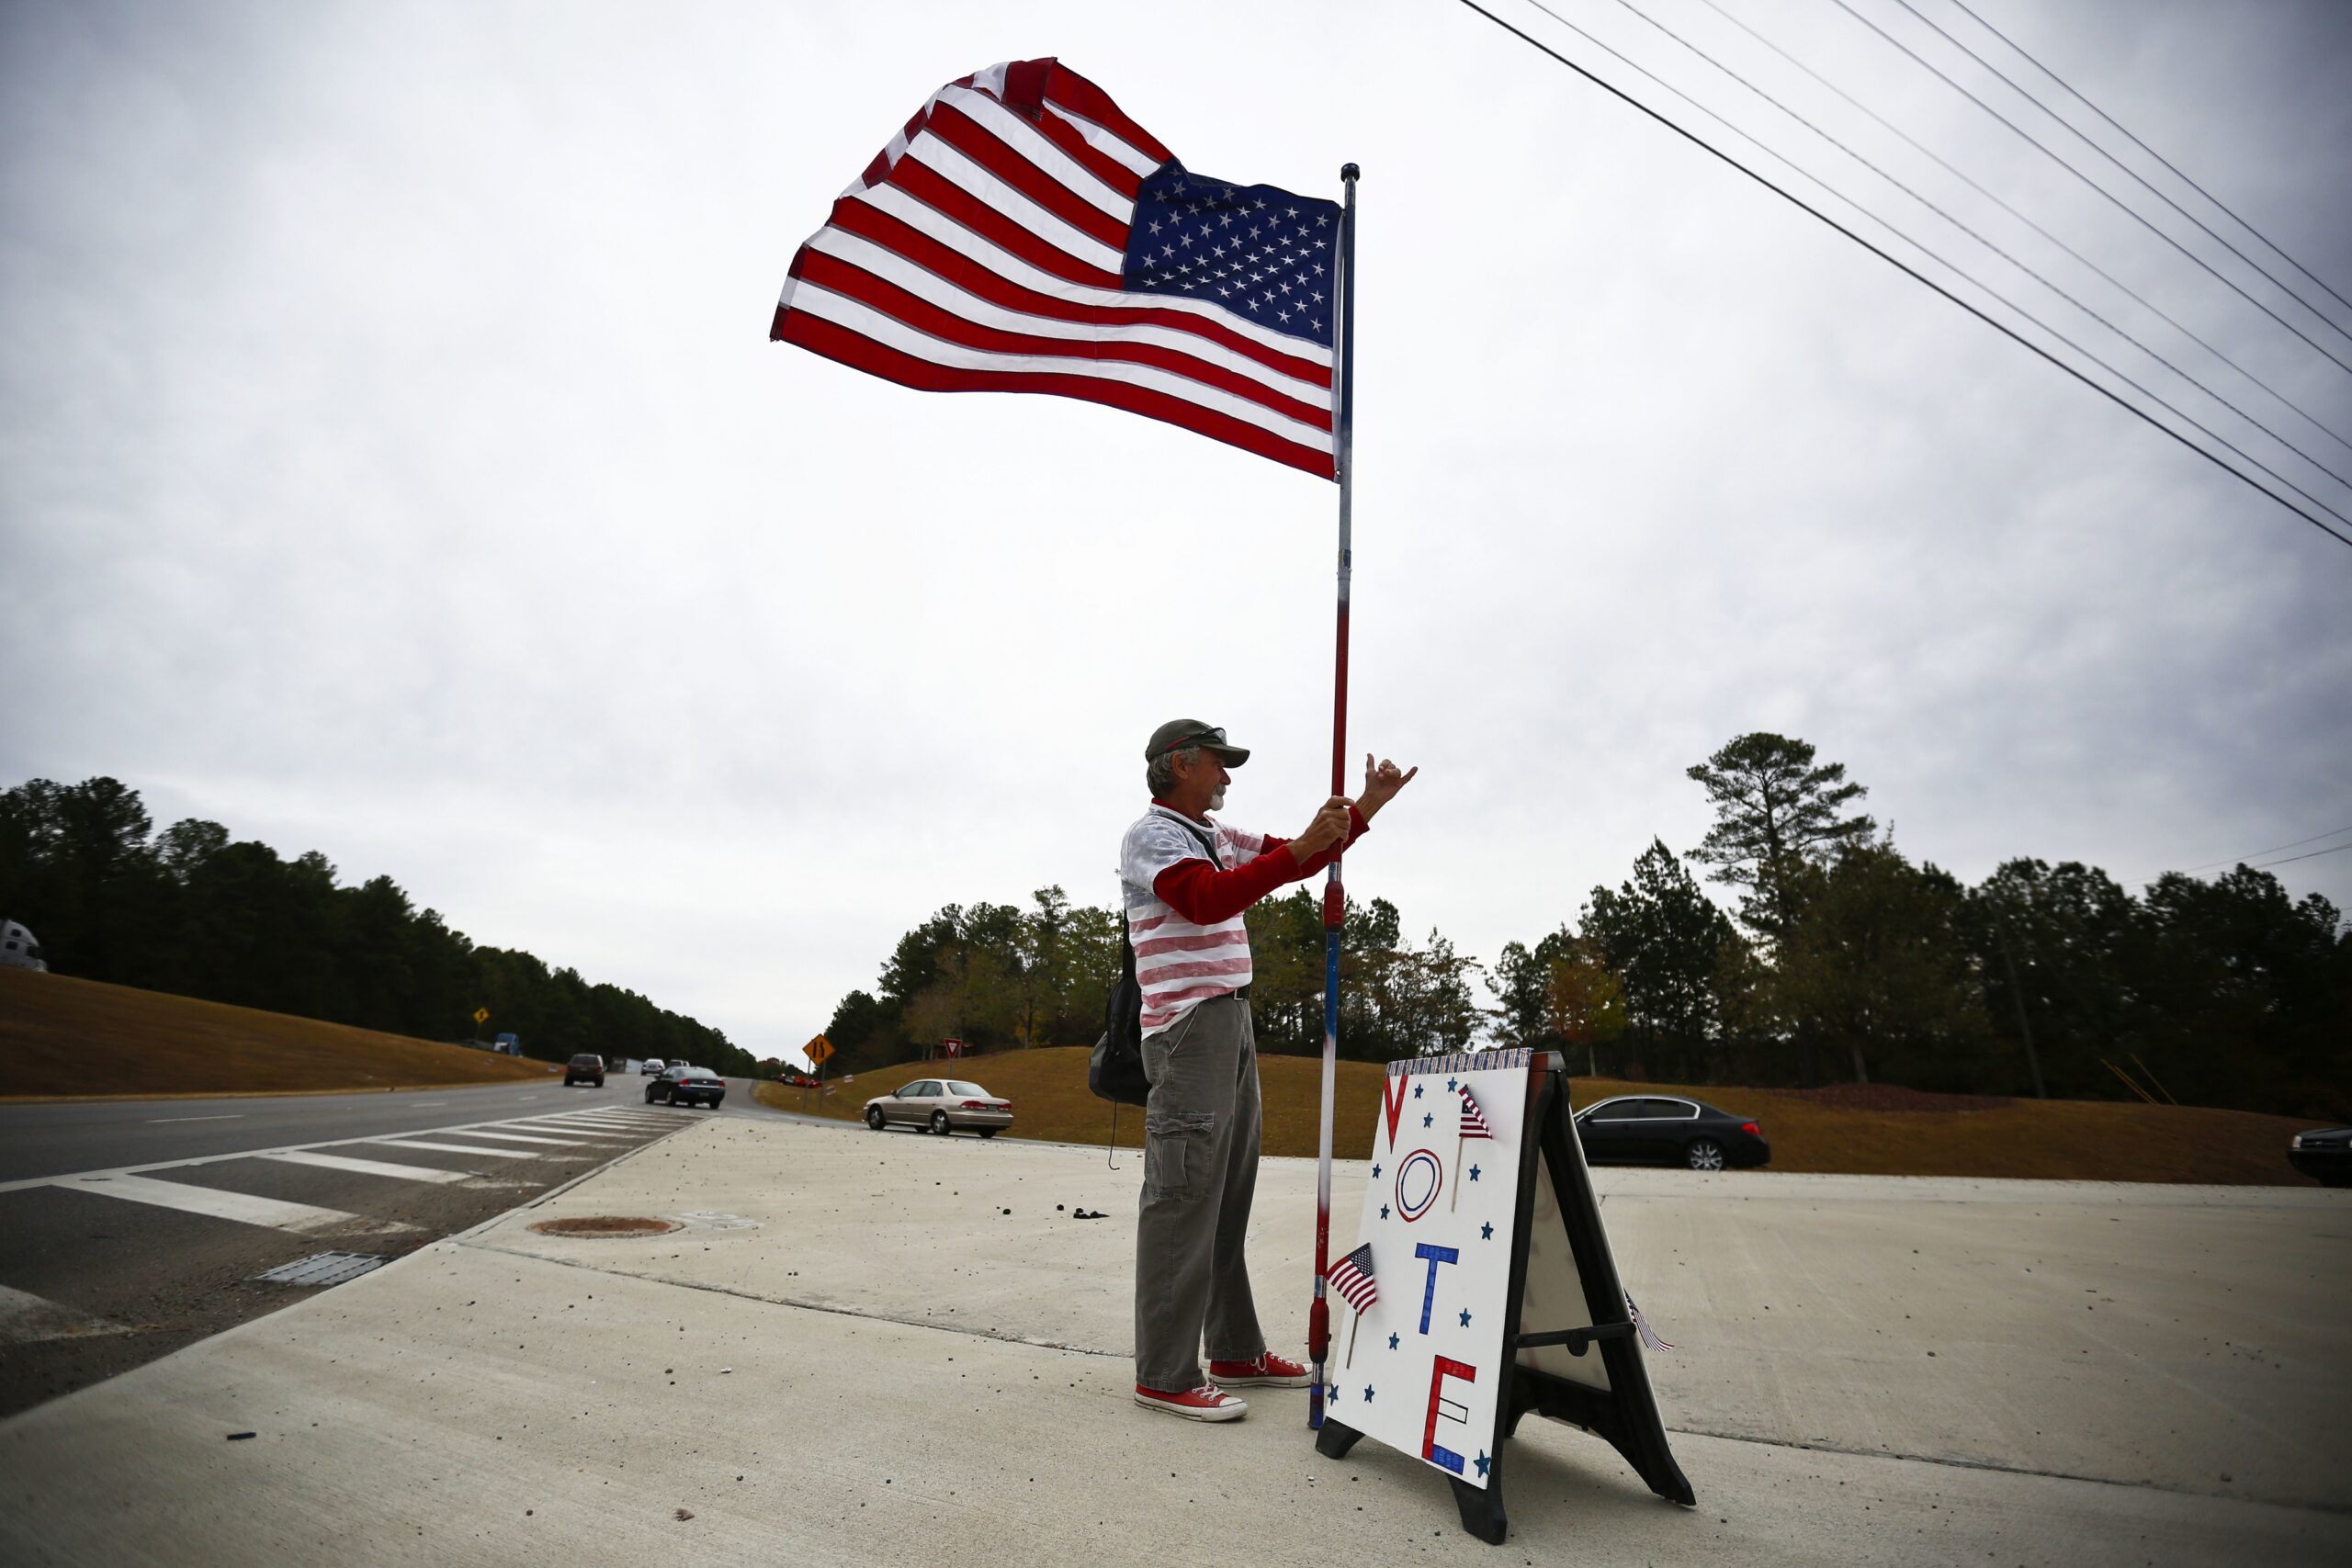 Person standing with American flag next to "vote" sign